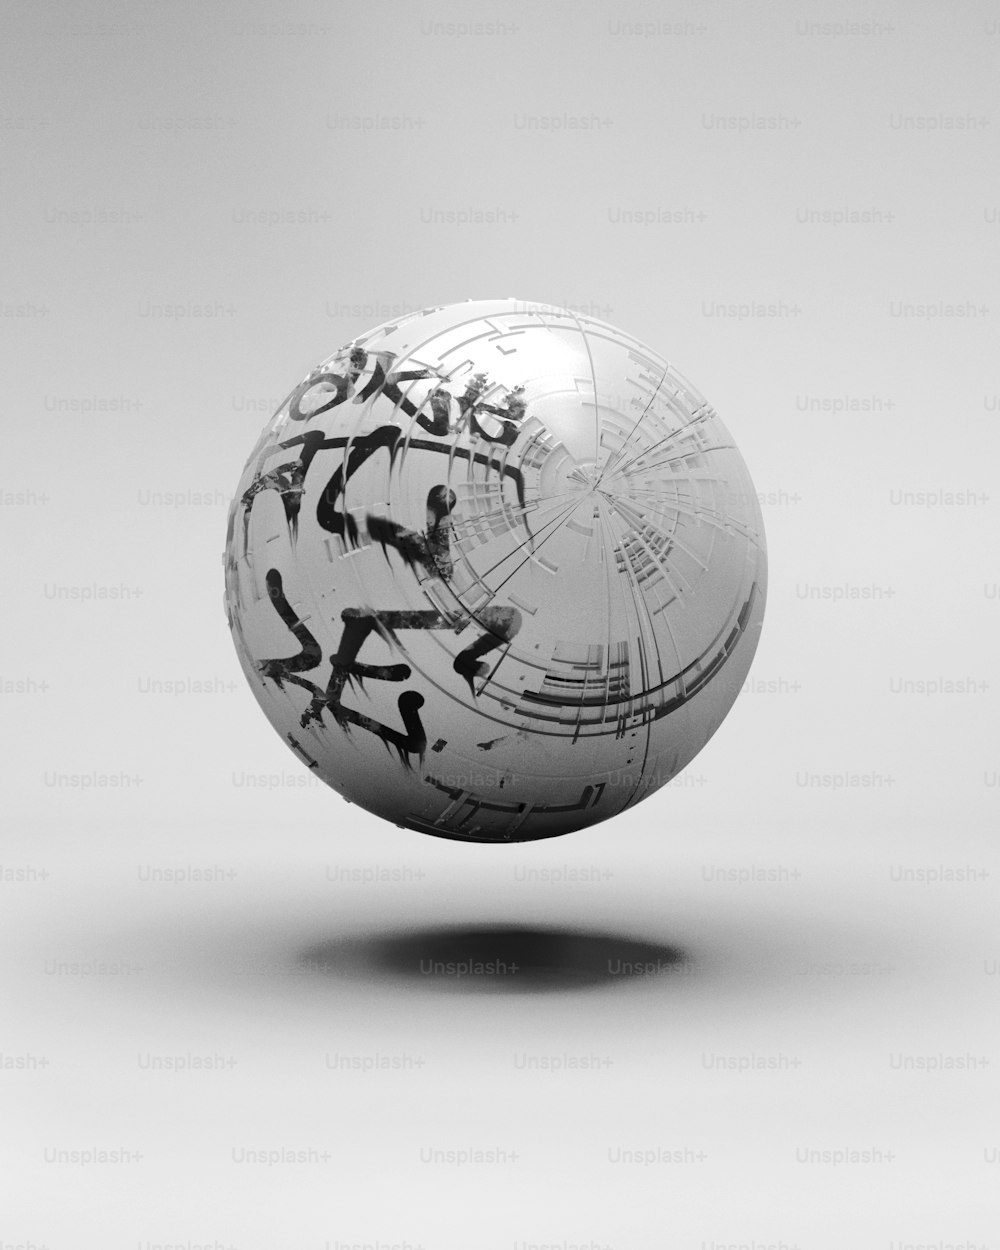 a white ball with writing on it in the air